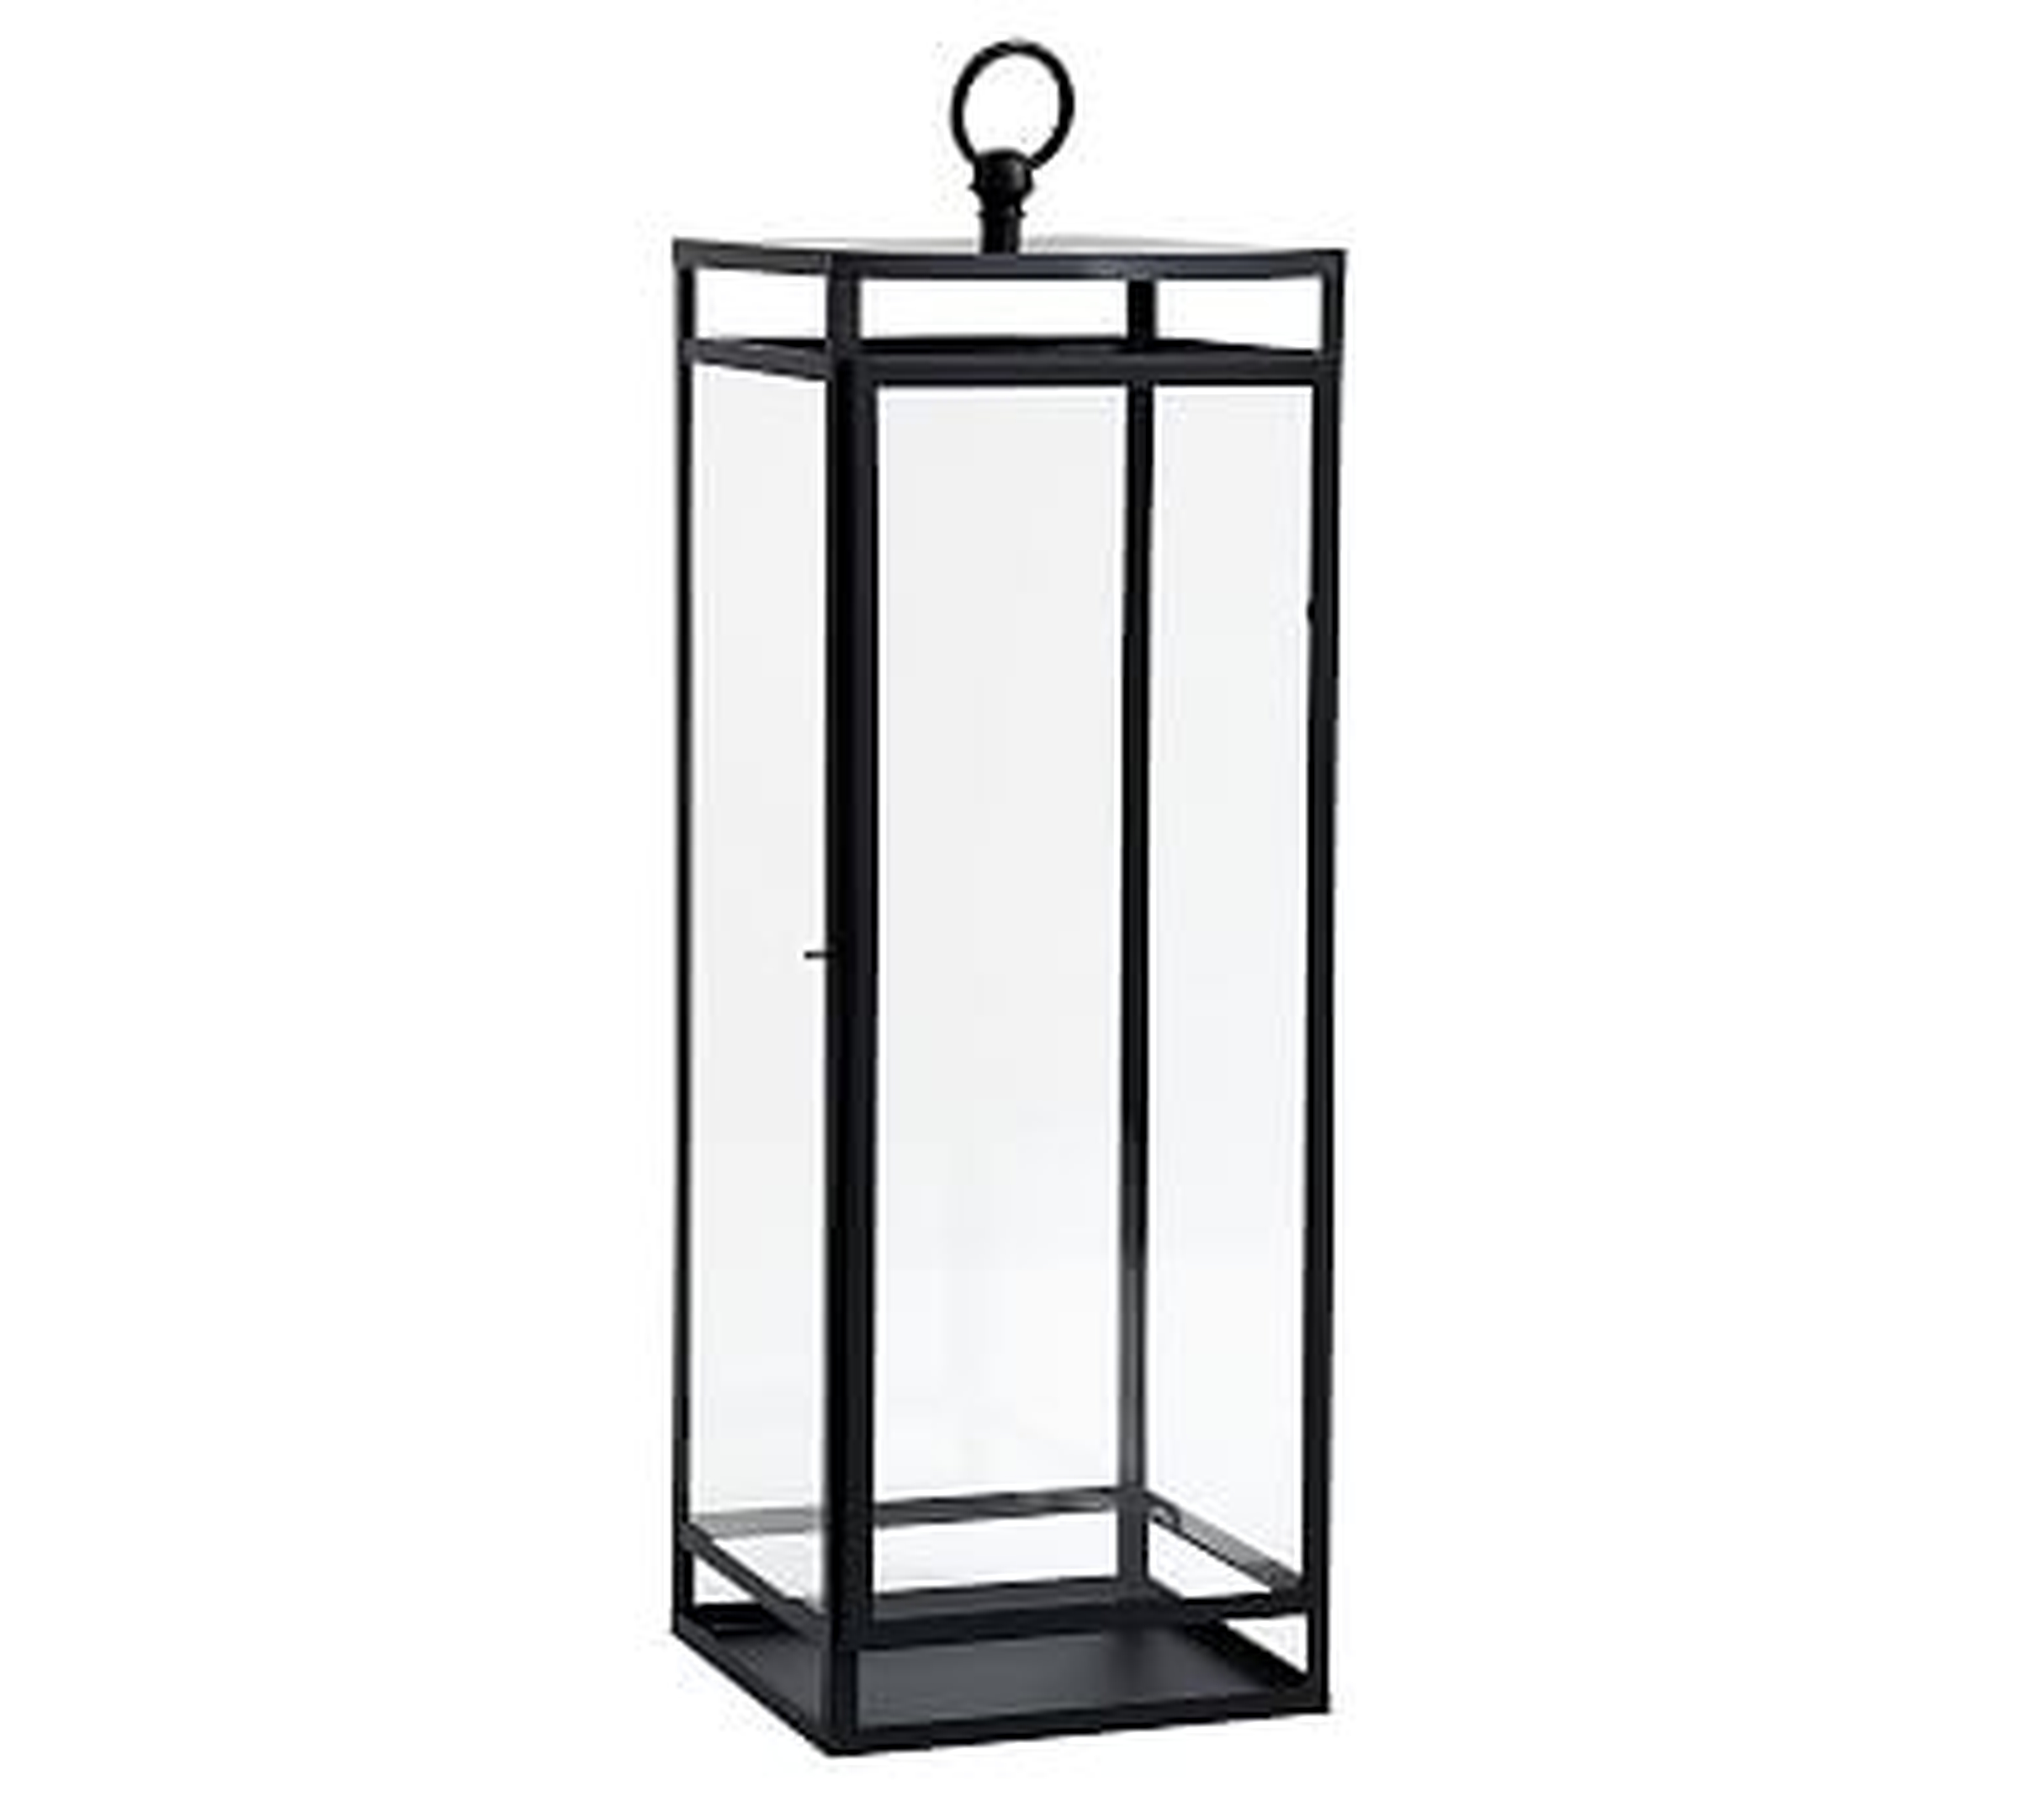 Maxwell Handcrafted Outdoor Lantern, Large, 28" - Black - Pottery Barn